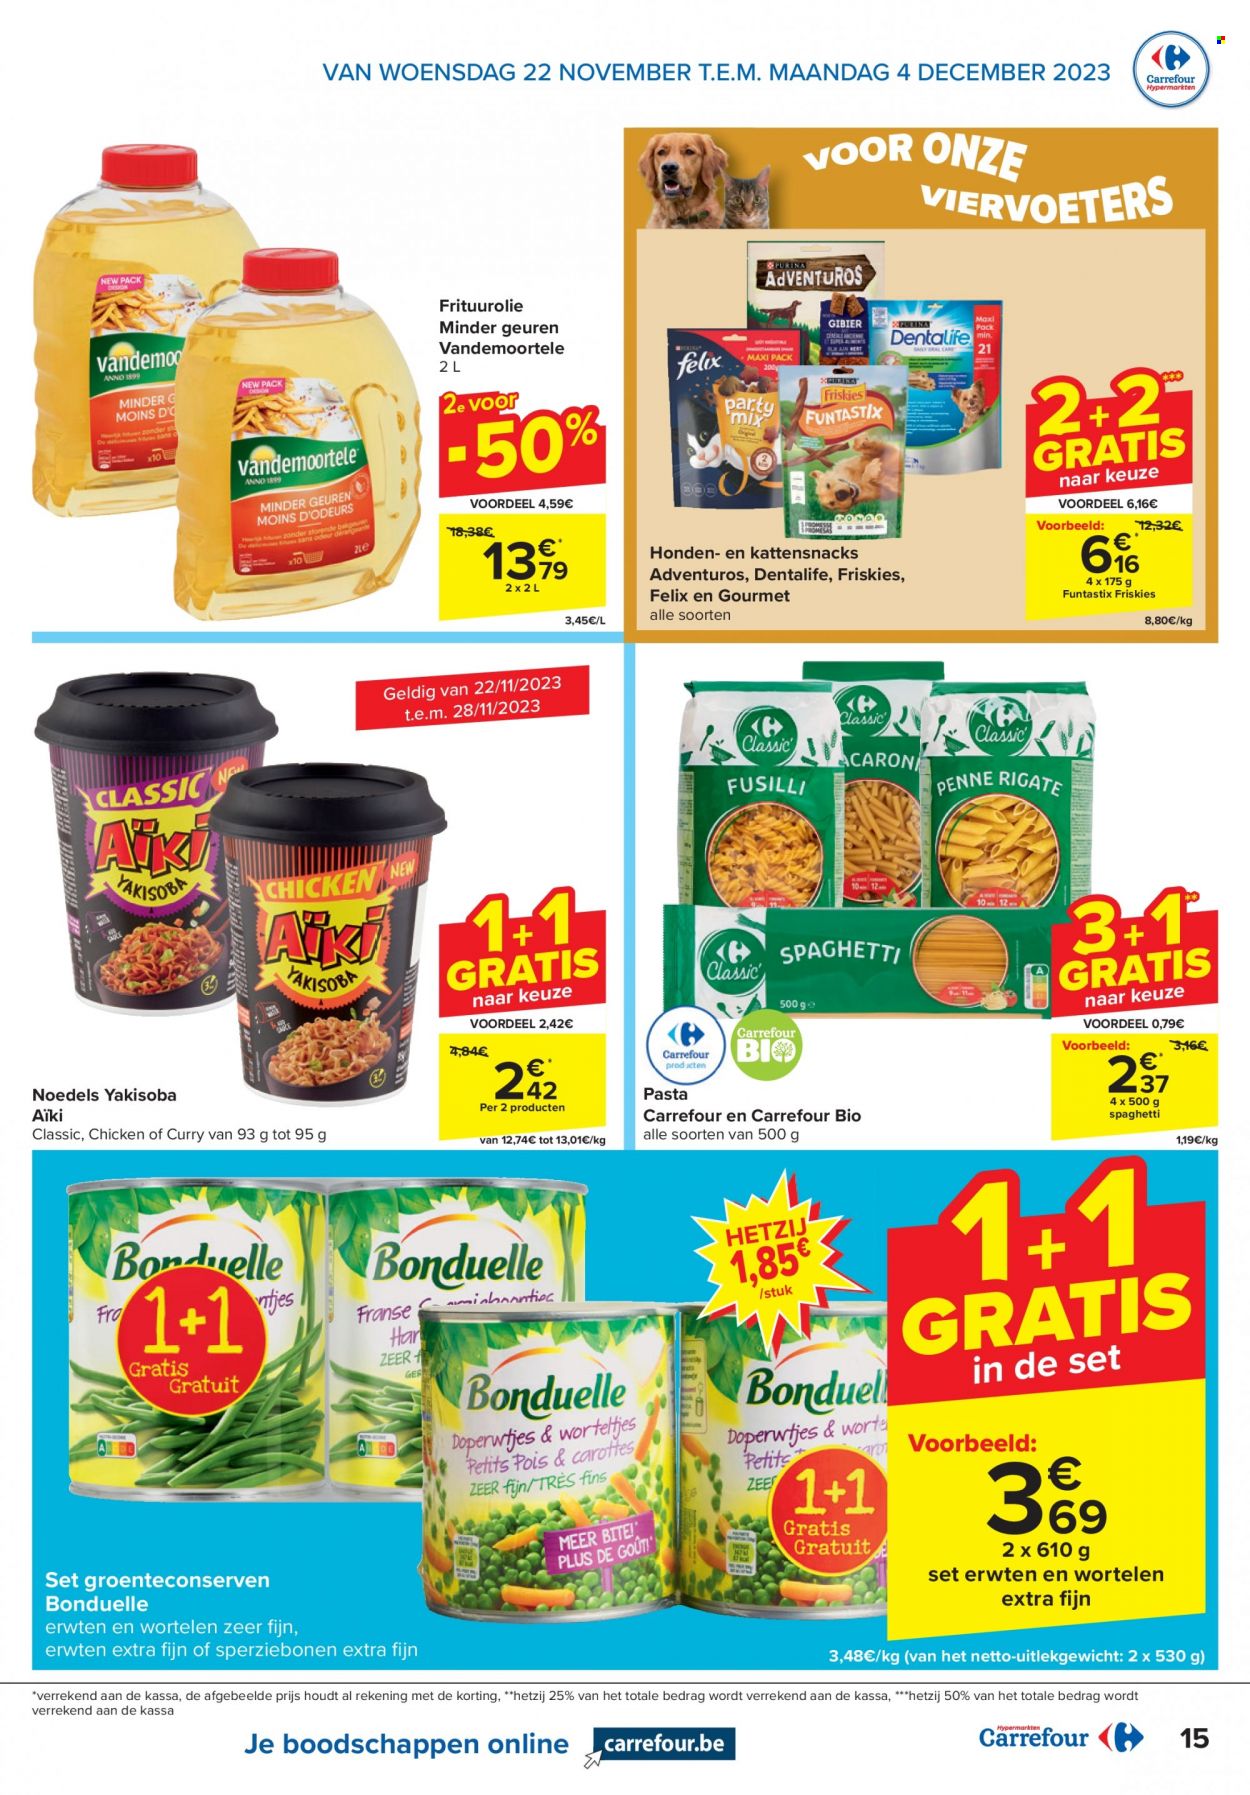 Catalogue Carrefour hypermarkt - 22.11.2023 - 4.12.2023. Page 15.